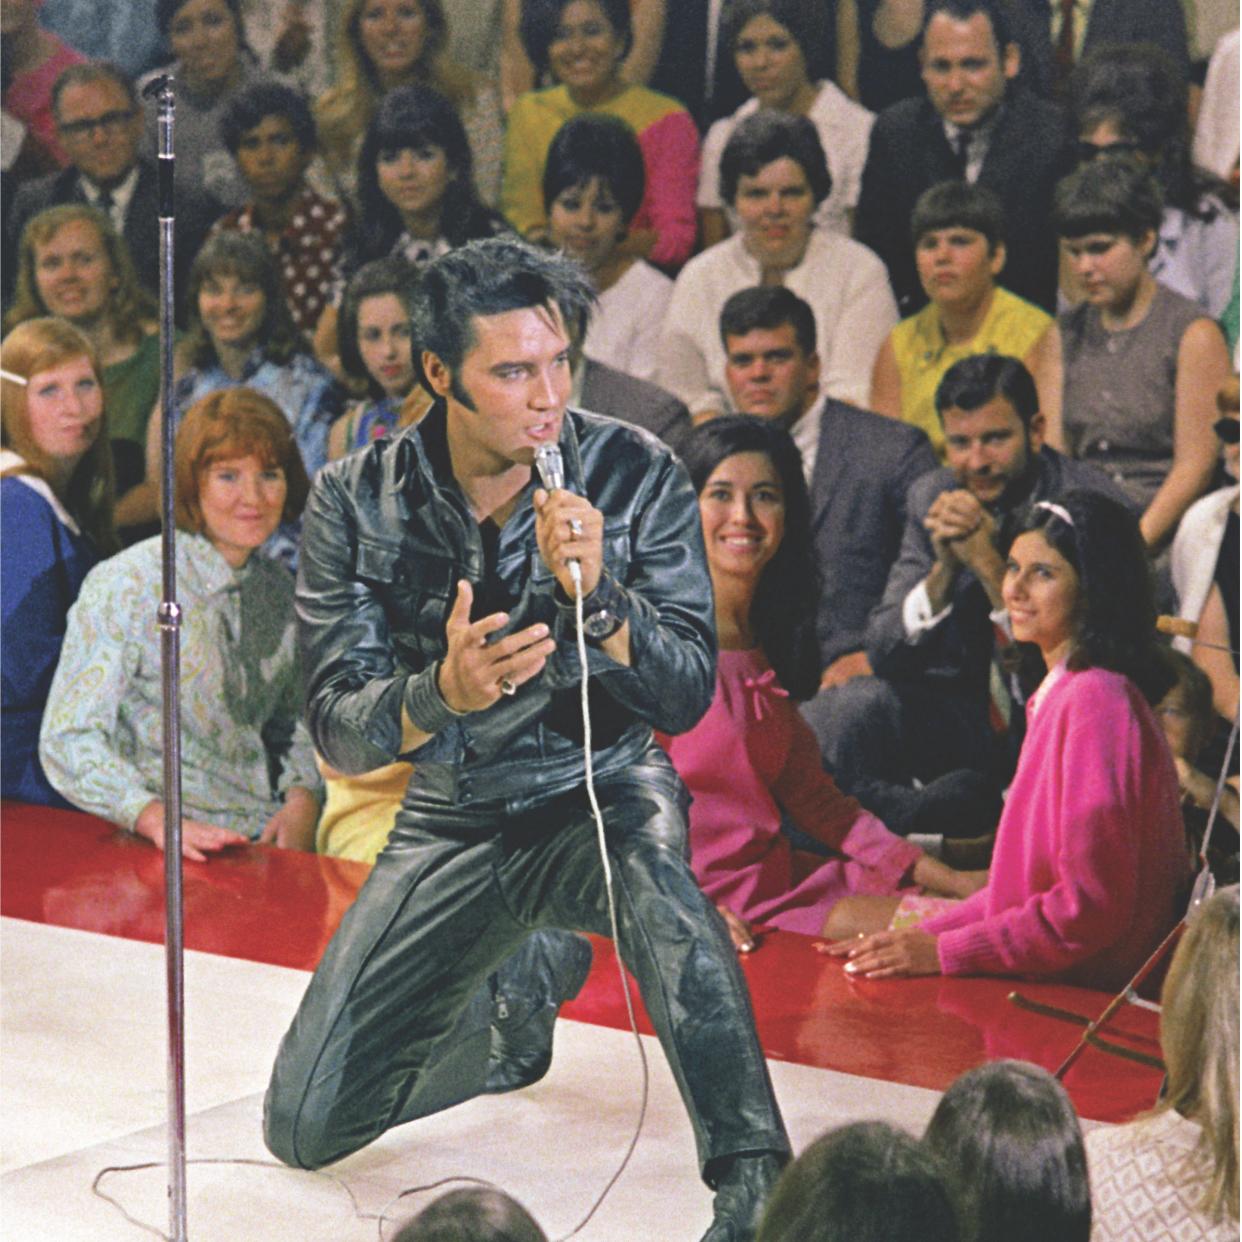 Presley works his magic in the ’68 Comeback Special. (Photo: Courtesy Paramount+)